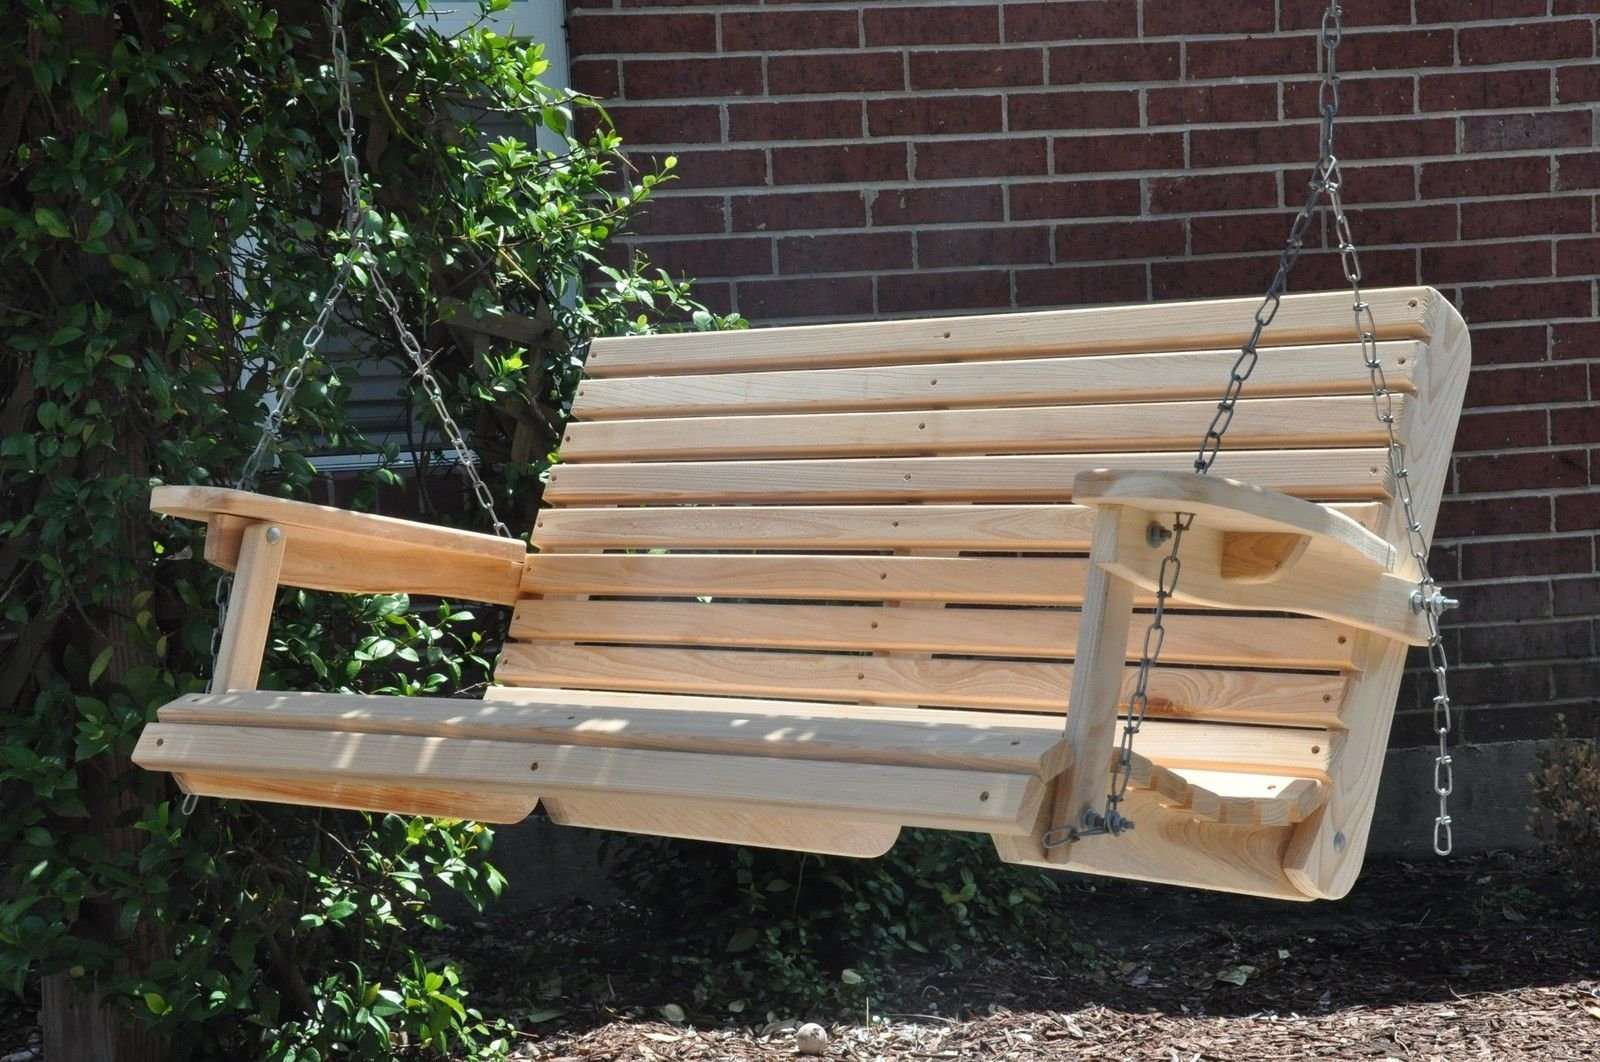 How to Build a Wooden Porch Swing